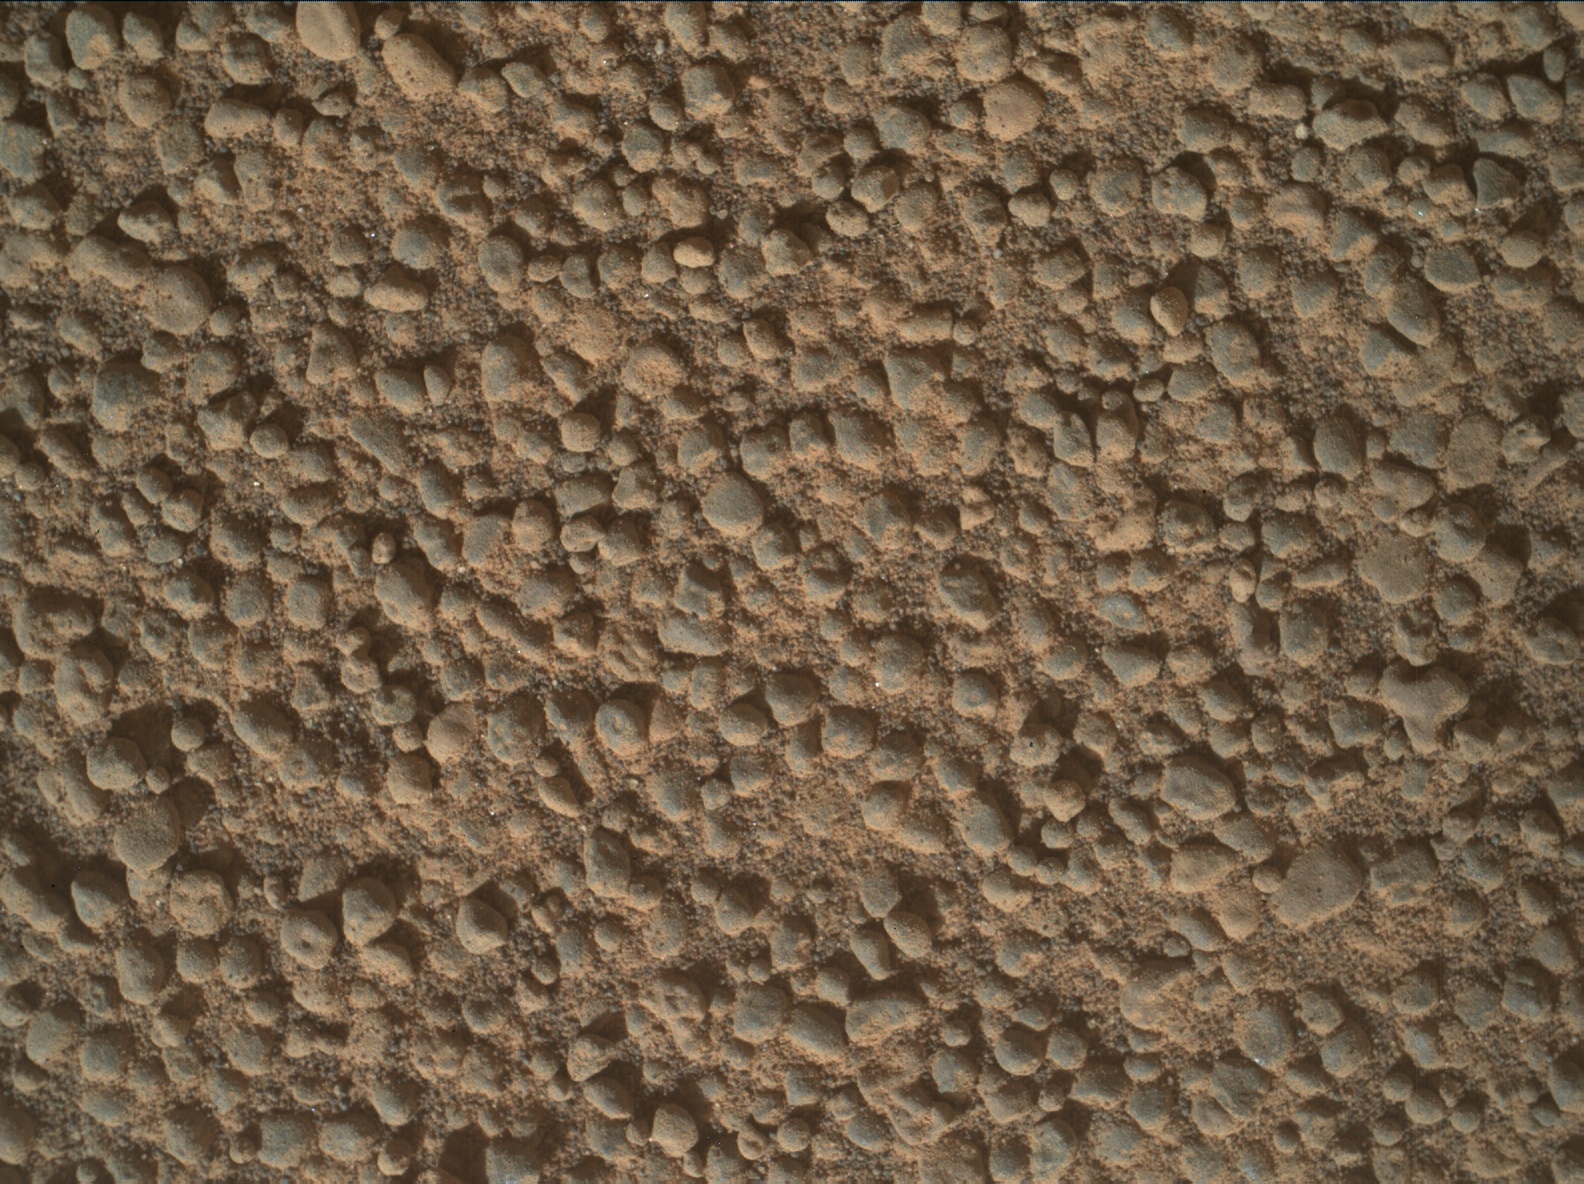 Nasa's Mars rover Curiosity acquired this image using its Mars Hand Lens Imager (MAHLI) on Sol 3566